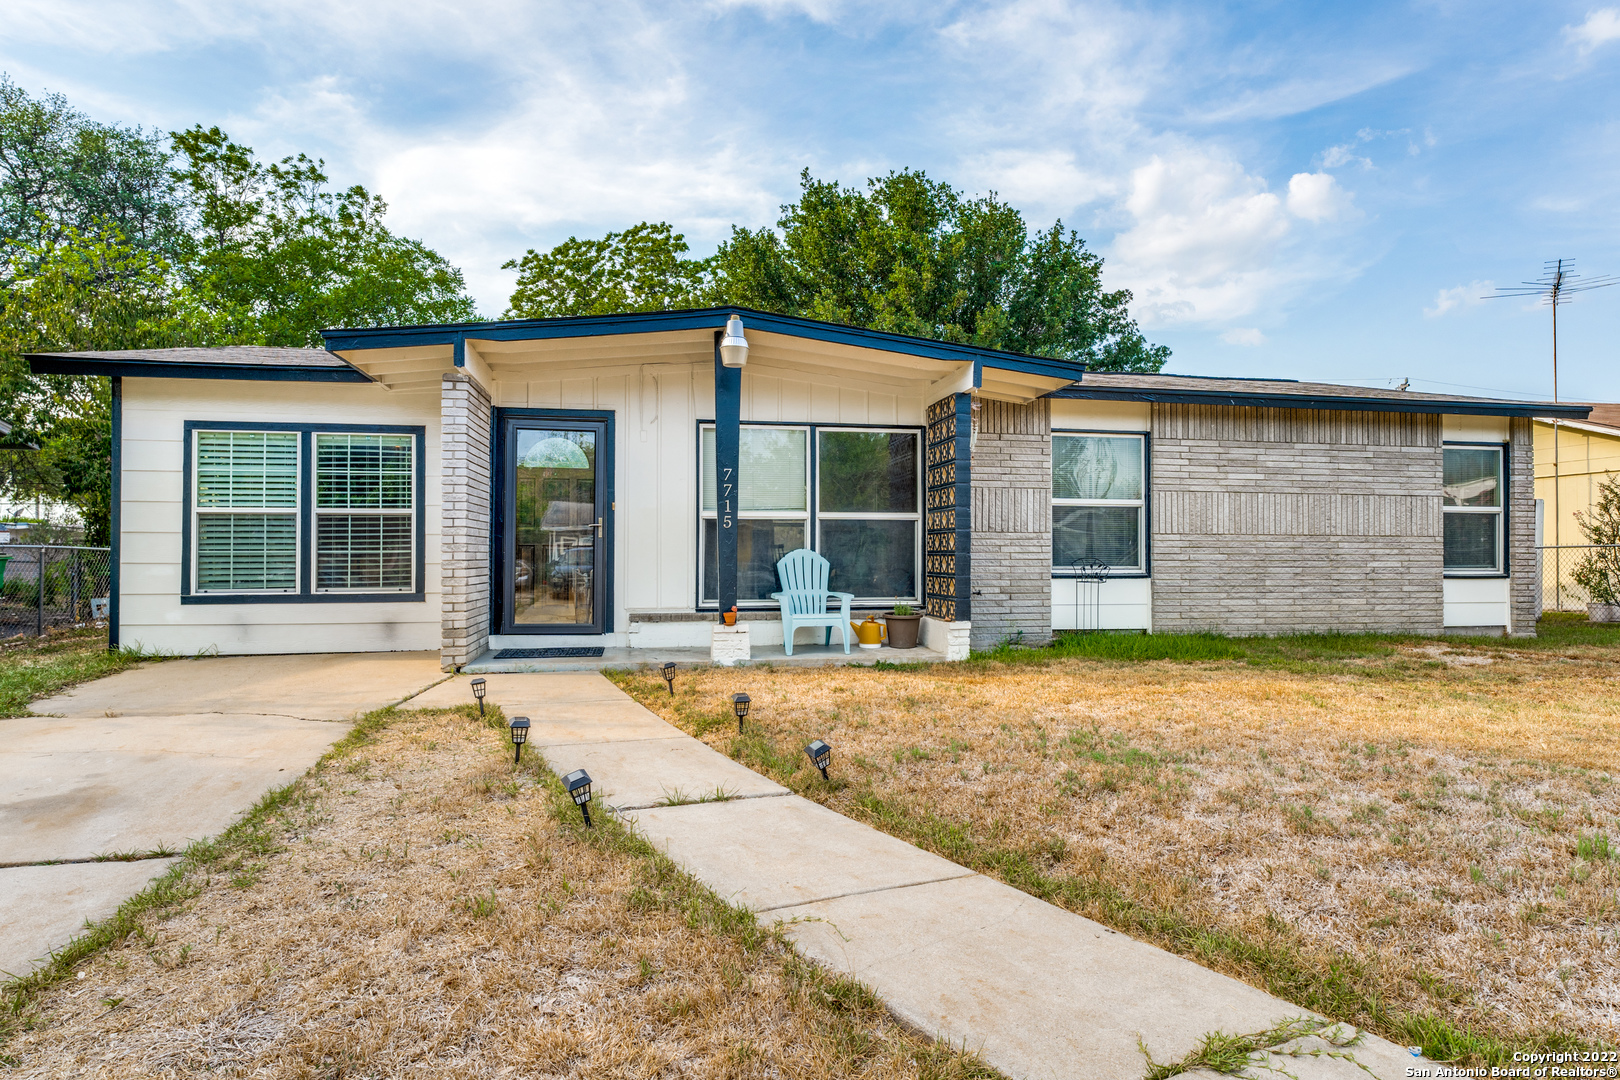 2 bedroom/1 bath home with an additional room to use as an office or bedroom that has been updated! Newly updated laundry room and bathroom. New AC unit installed in May 2020!! Great location! Located between 410 and Hwy 90, close to Lackland Air Force Base and shops! No HOA! Call for your private showing now!